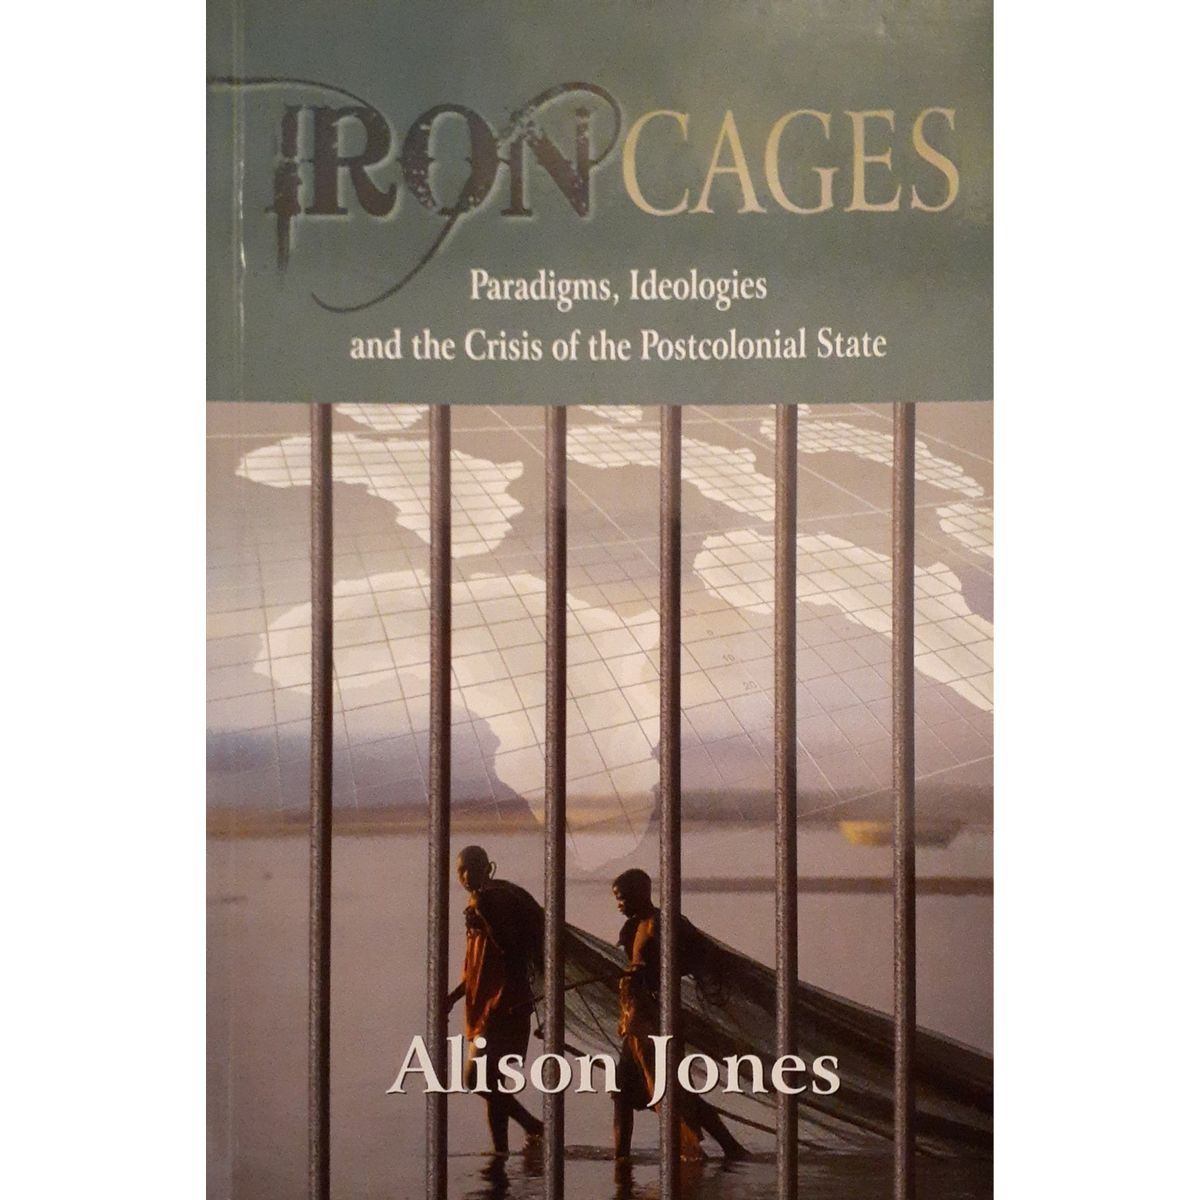 ISBN: 9781869141684 / 1869141687 - Iron Cages: Paradigms, Ideologies and the Crisis of the Postcolonial State by Alison Jones [2010]